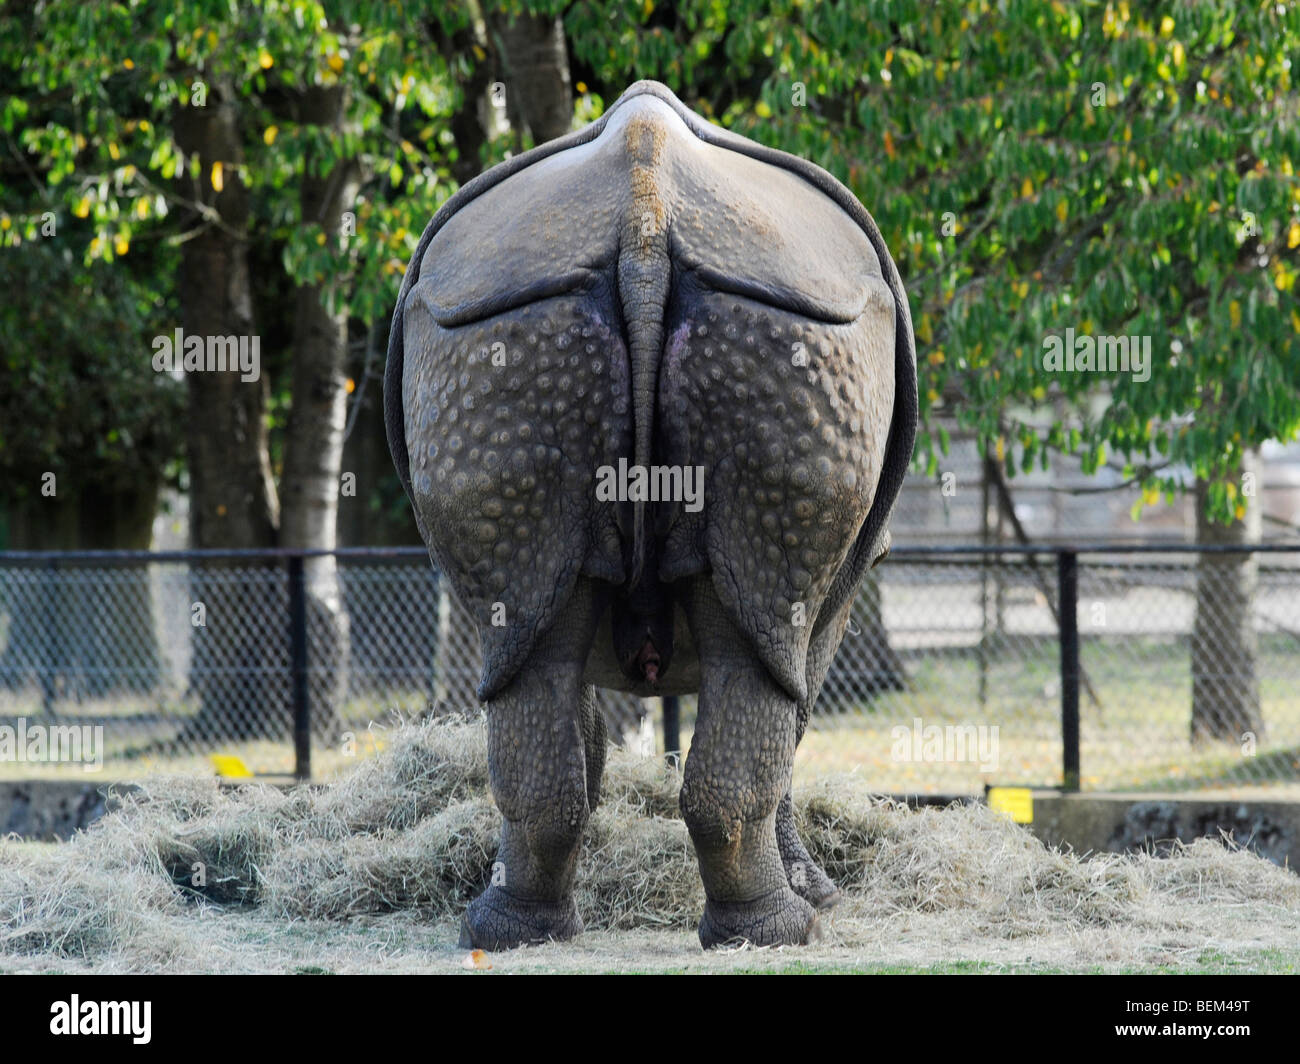 The rear of a rhino showing the plated hide. Stock Photo